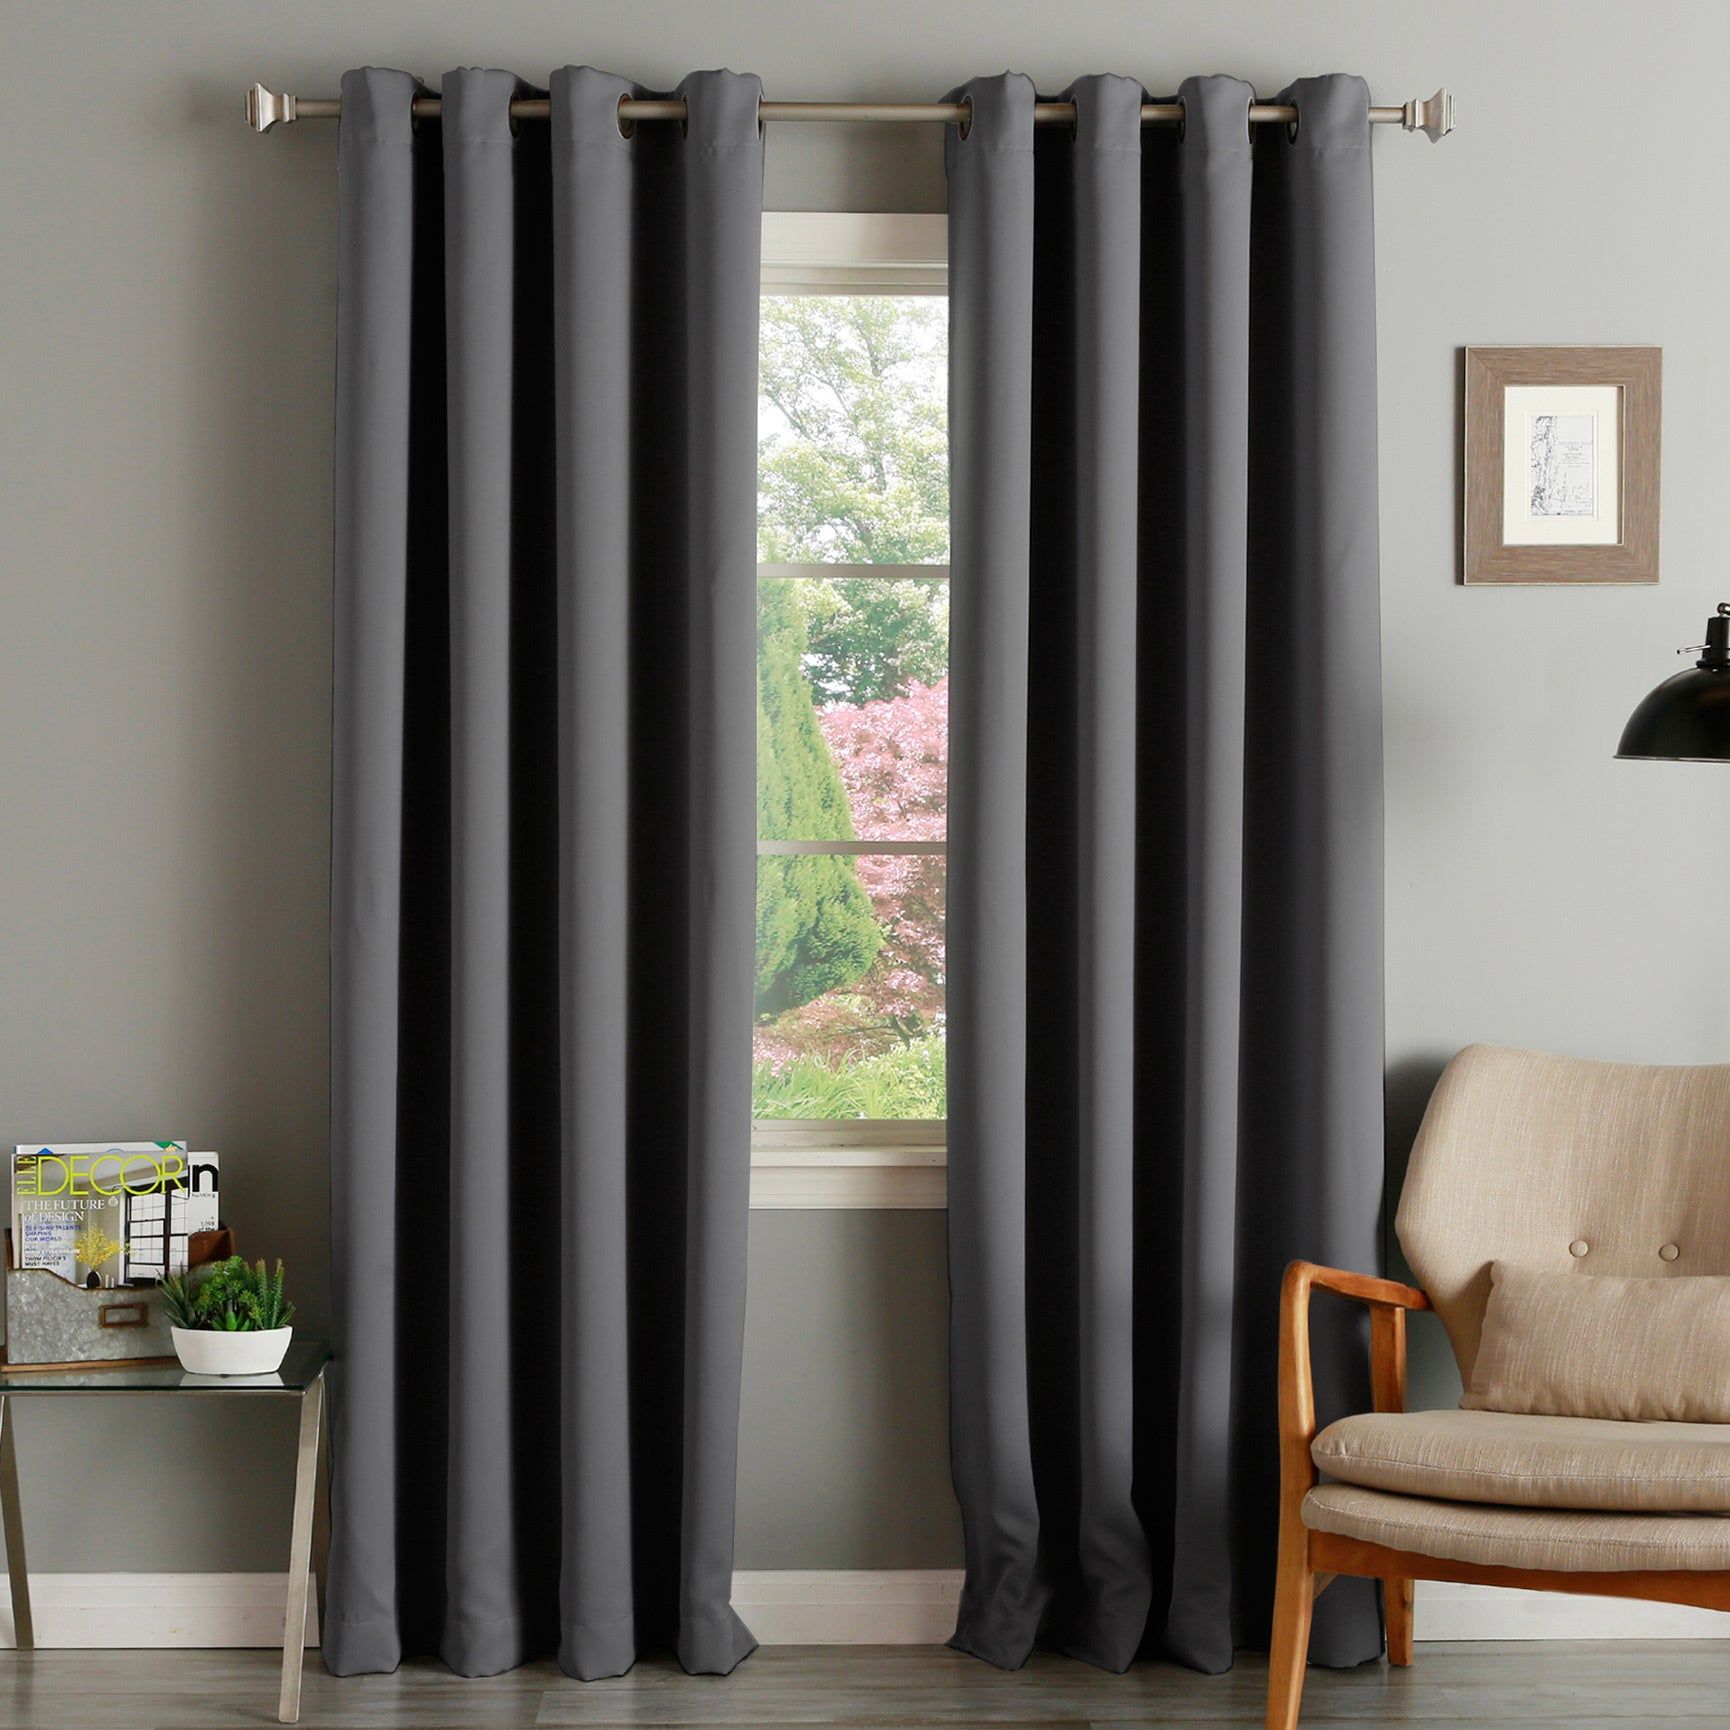 Aurora Home Thermal Insulated Blackout Grommet Top 84 Inch Curtain Panel  Pair – 52 X 84 Intended For Duran Thermal Insulated Blackout Grommet Curtain Panels (View 20 of 20)